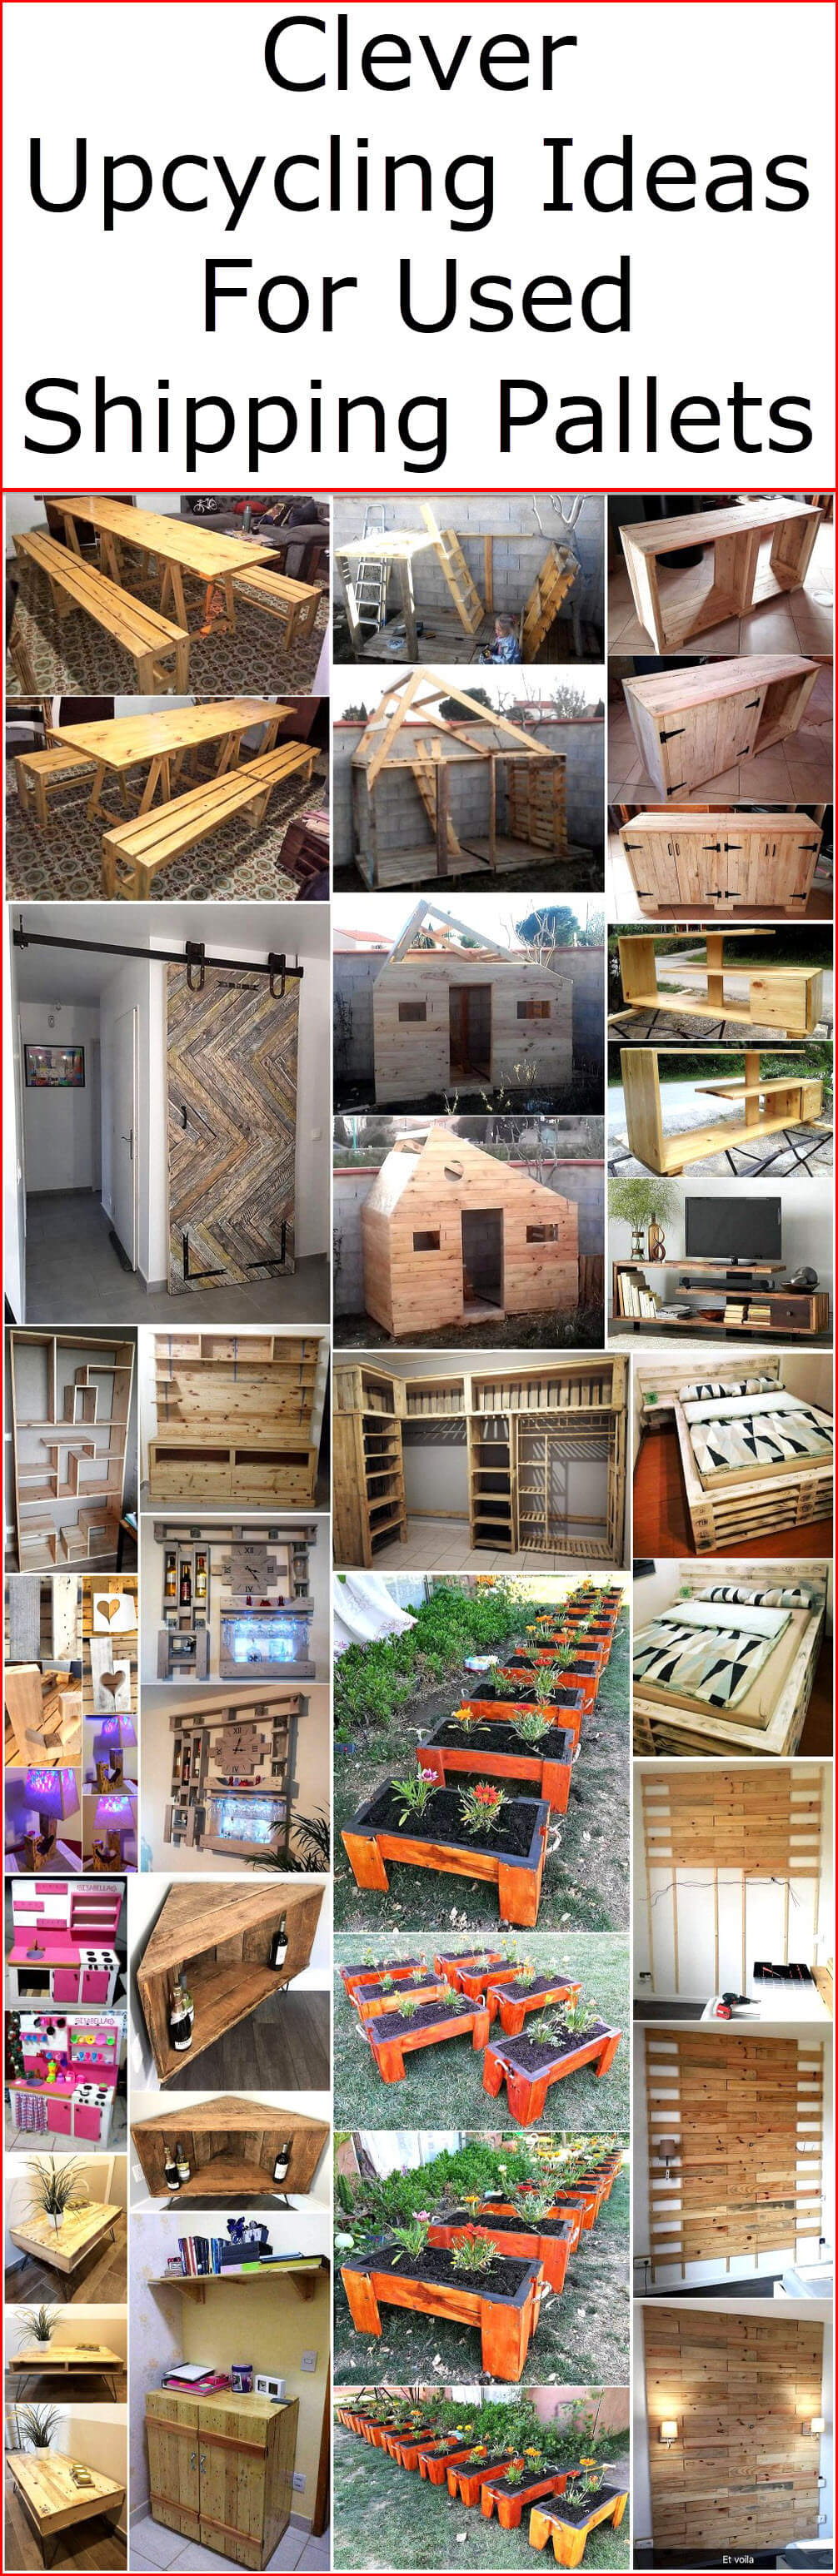 Clever Upcycling Ideas For Used Shipping Pallets